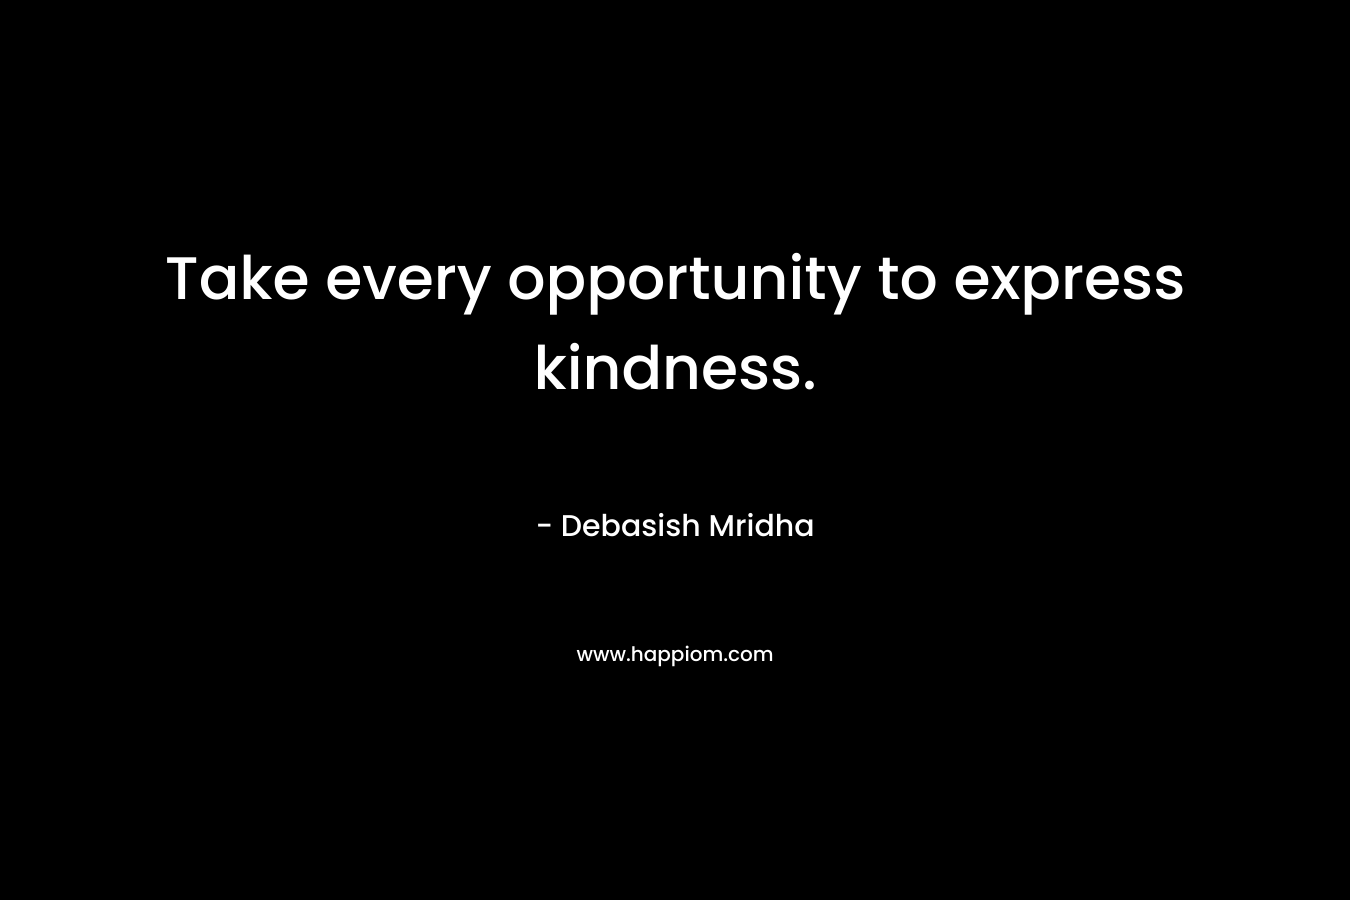 Take every opportunity to express kindness.